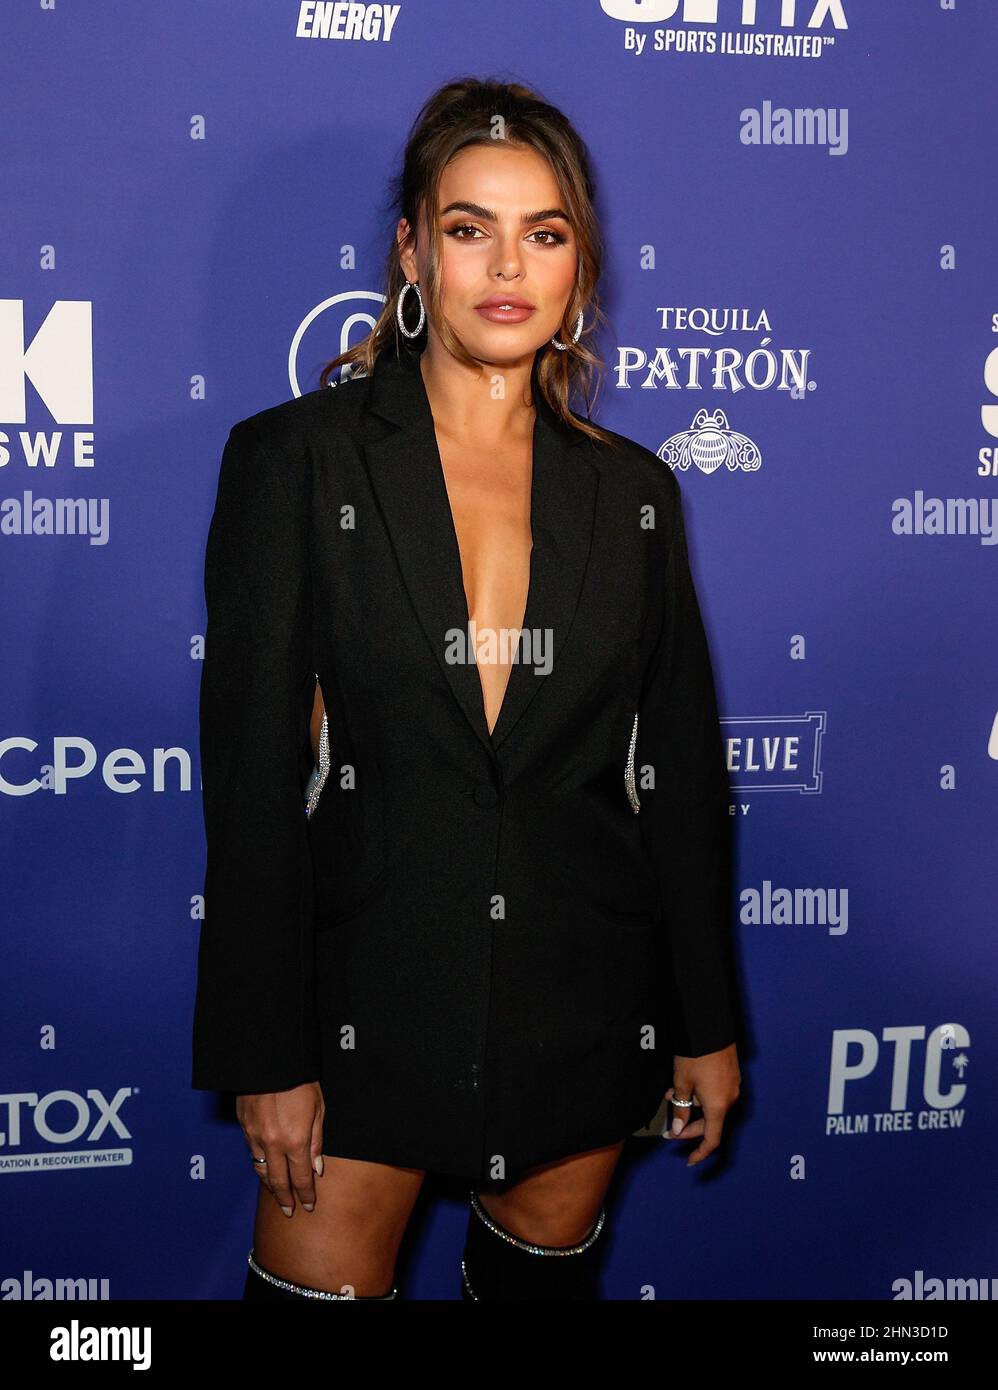 Los Angeles, USA. 12th Feb, 2022. Brooks Nader attends the Sports Illustrated Super Bowl Party at Century City Park on February 12, 2022 in Los Angeles, California. Photo: Shea Flynn/imageSPACE Credit: Imagespace/Alamy Live News Stock Photo